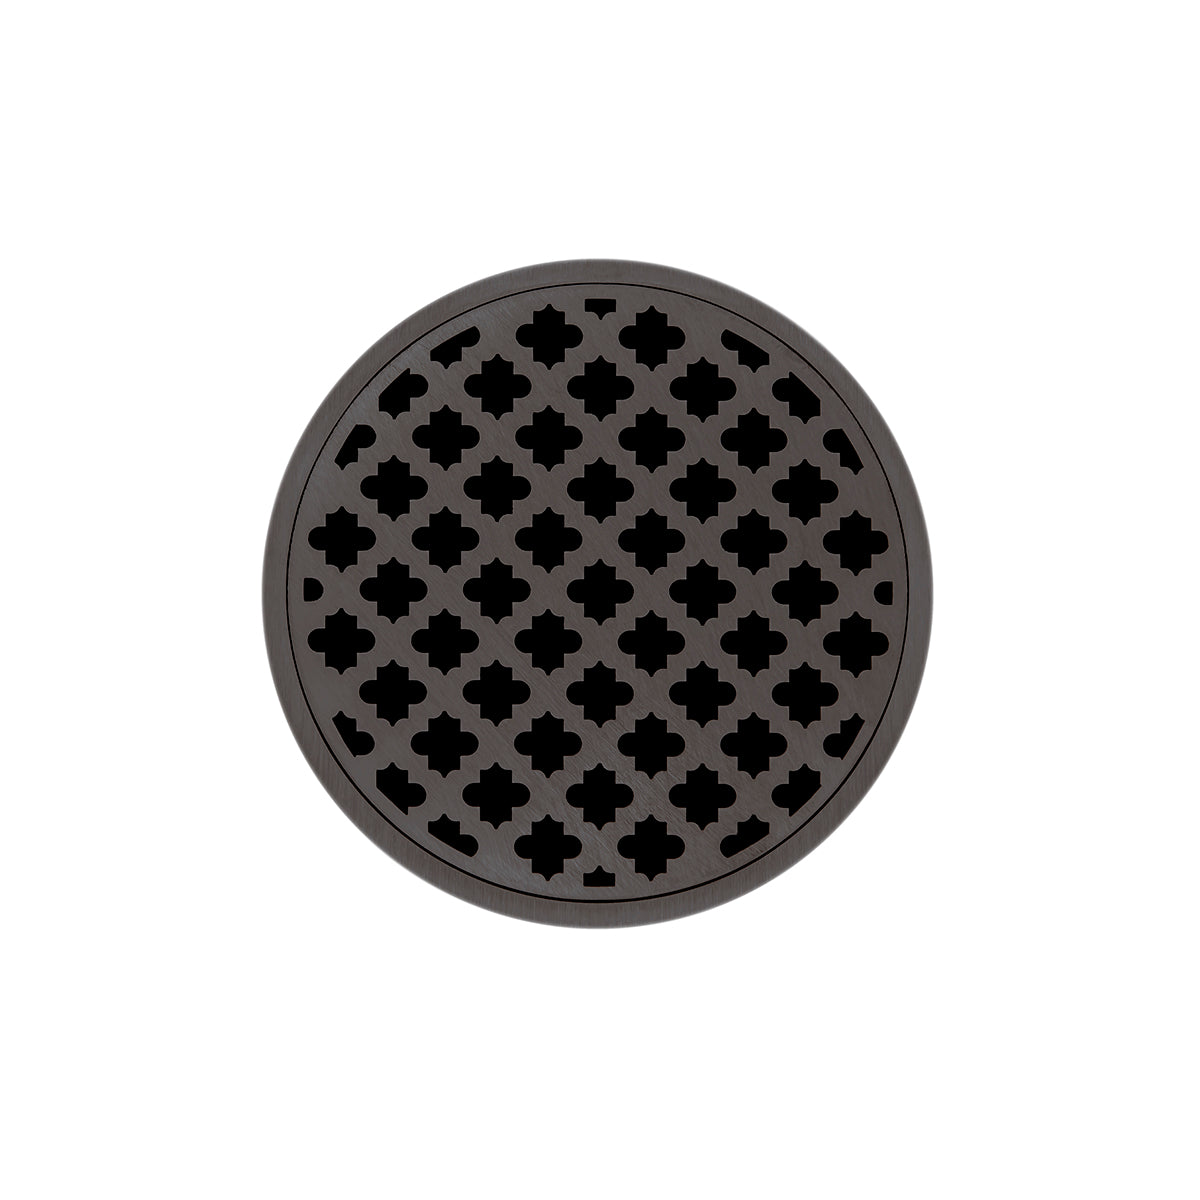 Infinity Drain 5" Round RMDB 5 Premium Center Drain Kit with Moor Pattern Decorative Plate with ABS Bonded Flange Drain Body, 2", 3" and 4" Outlet